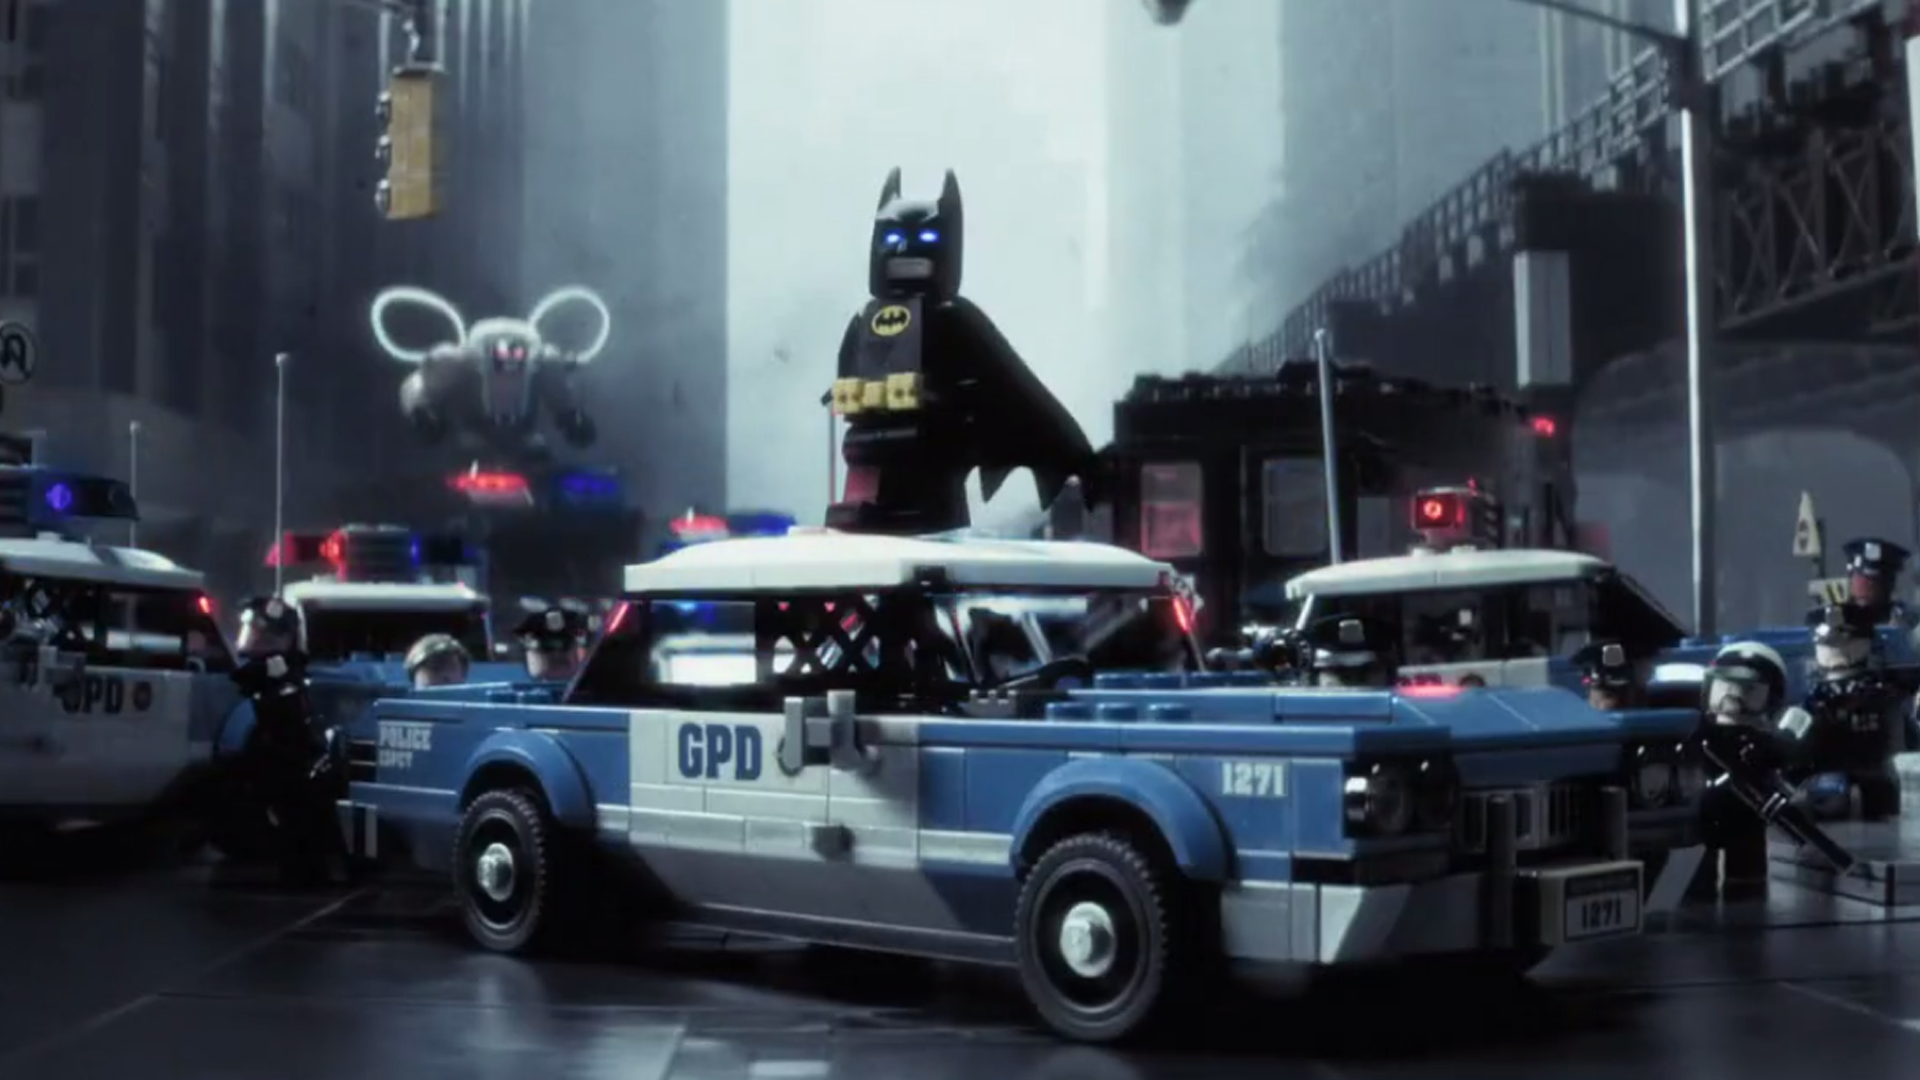 The Batman Movie LEGO Sets Confirmed for 2022 